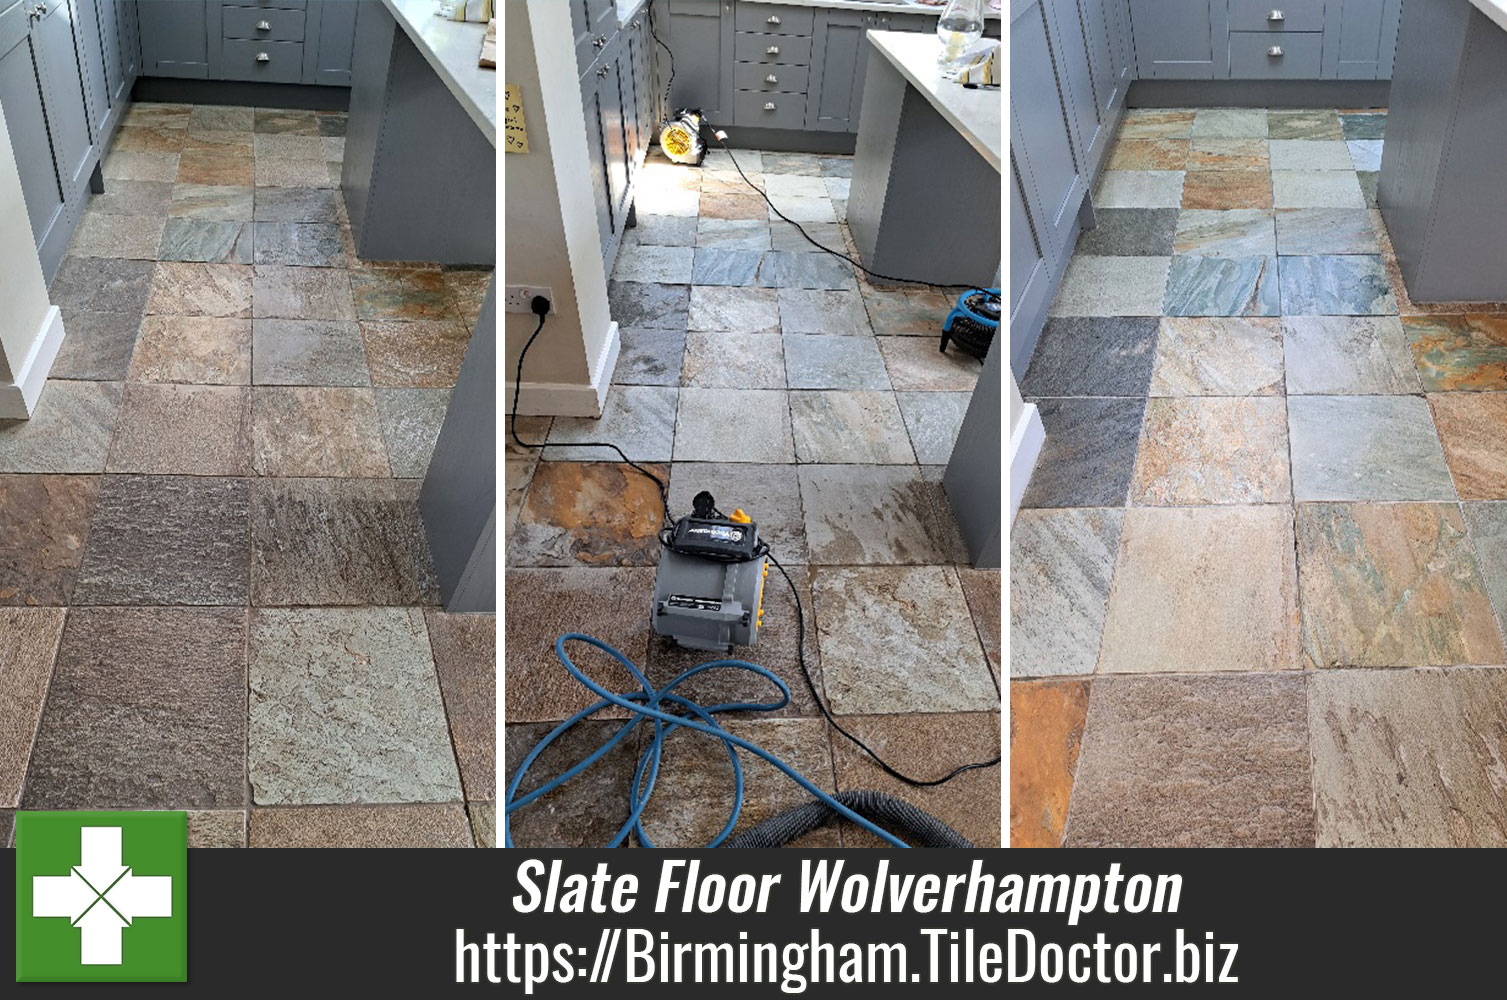 Tile Doctor X-Tra Seal Sealer used to Seal and Improve Slate Flooring in Wolverhampton